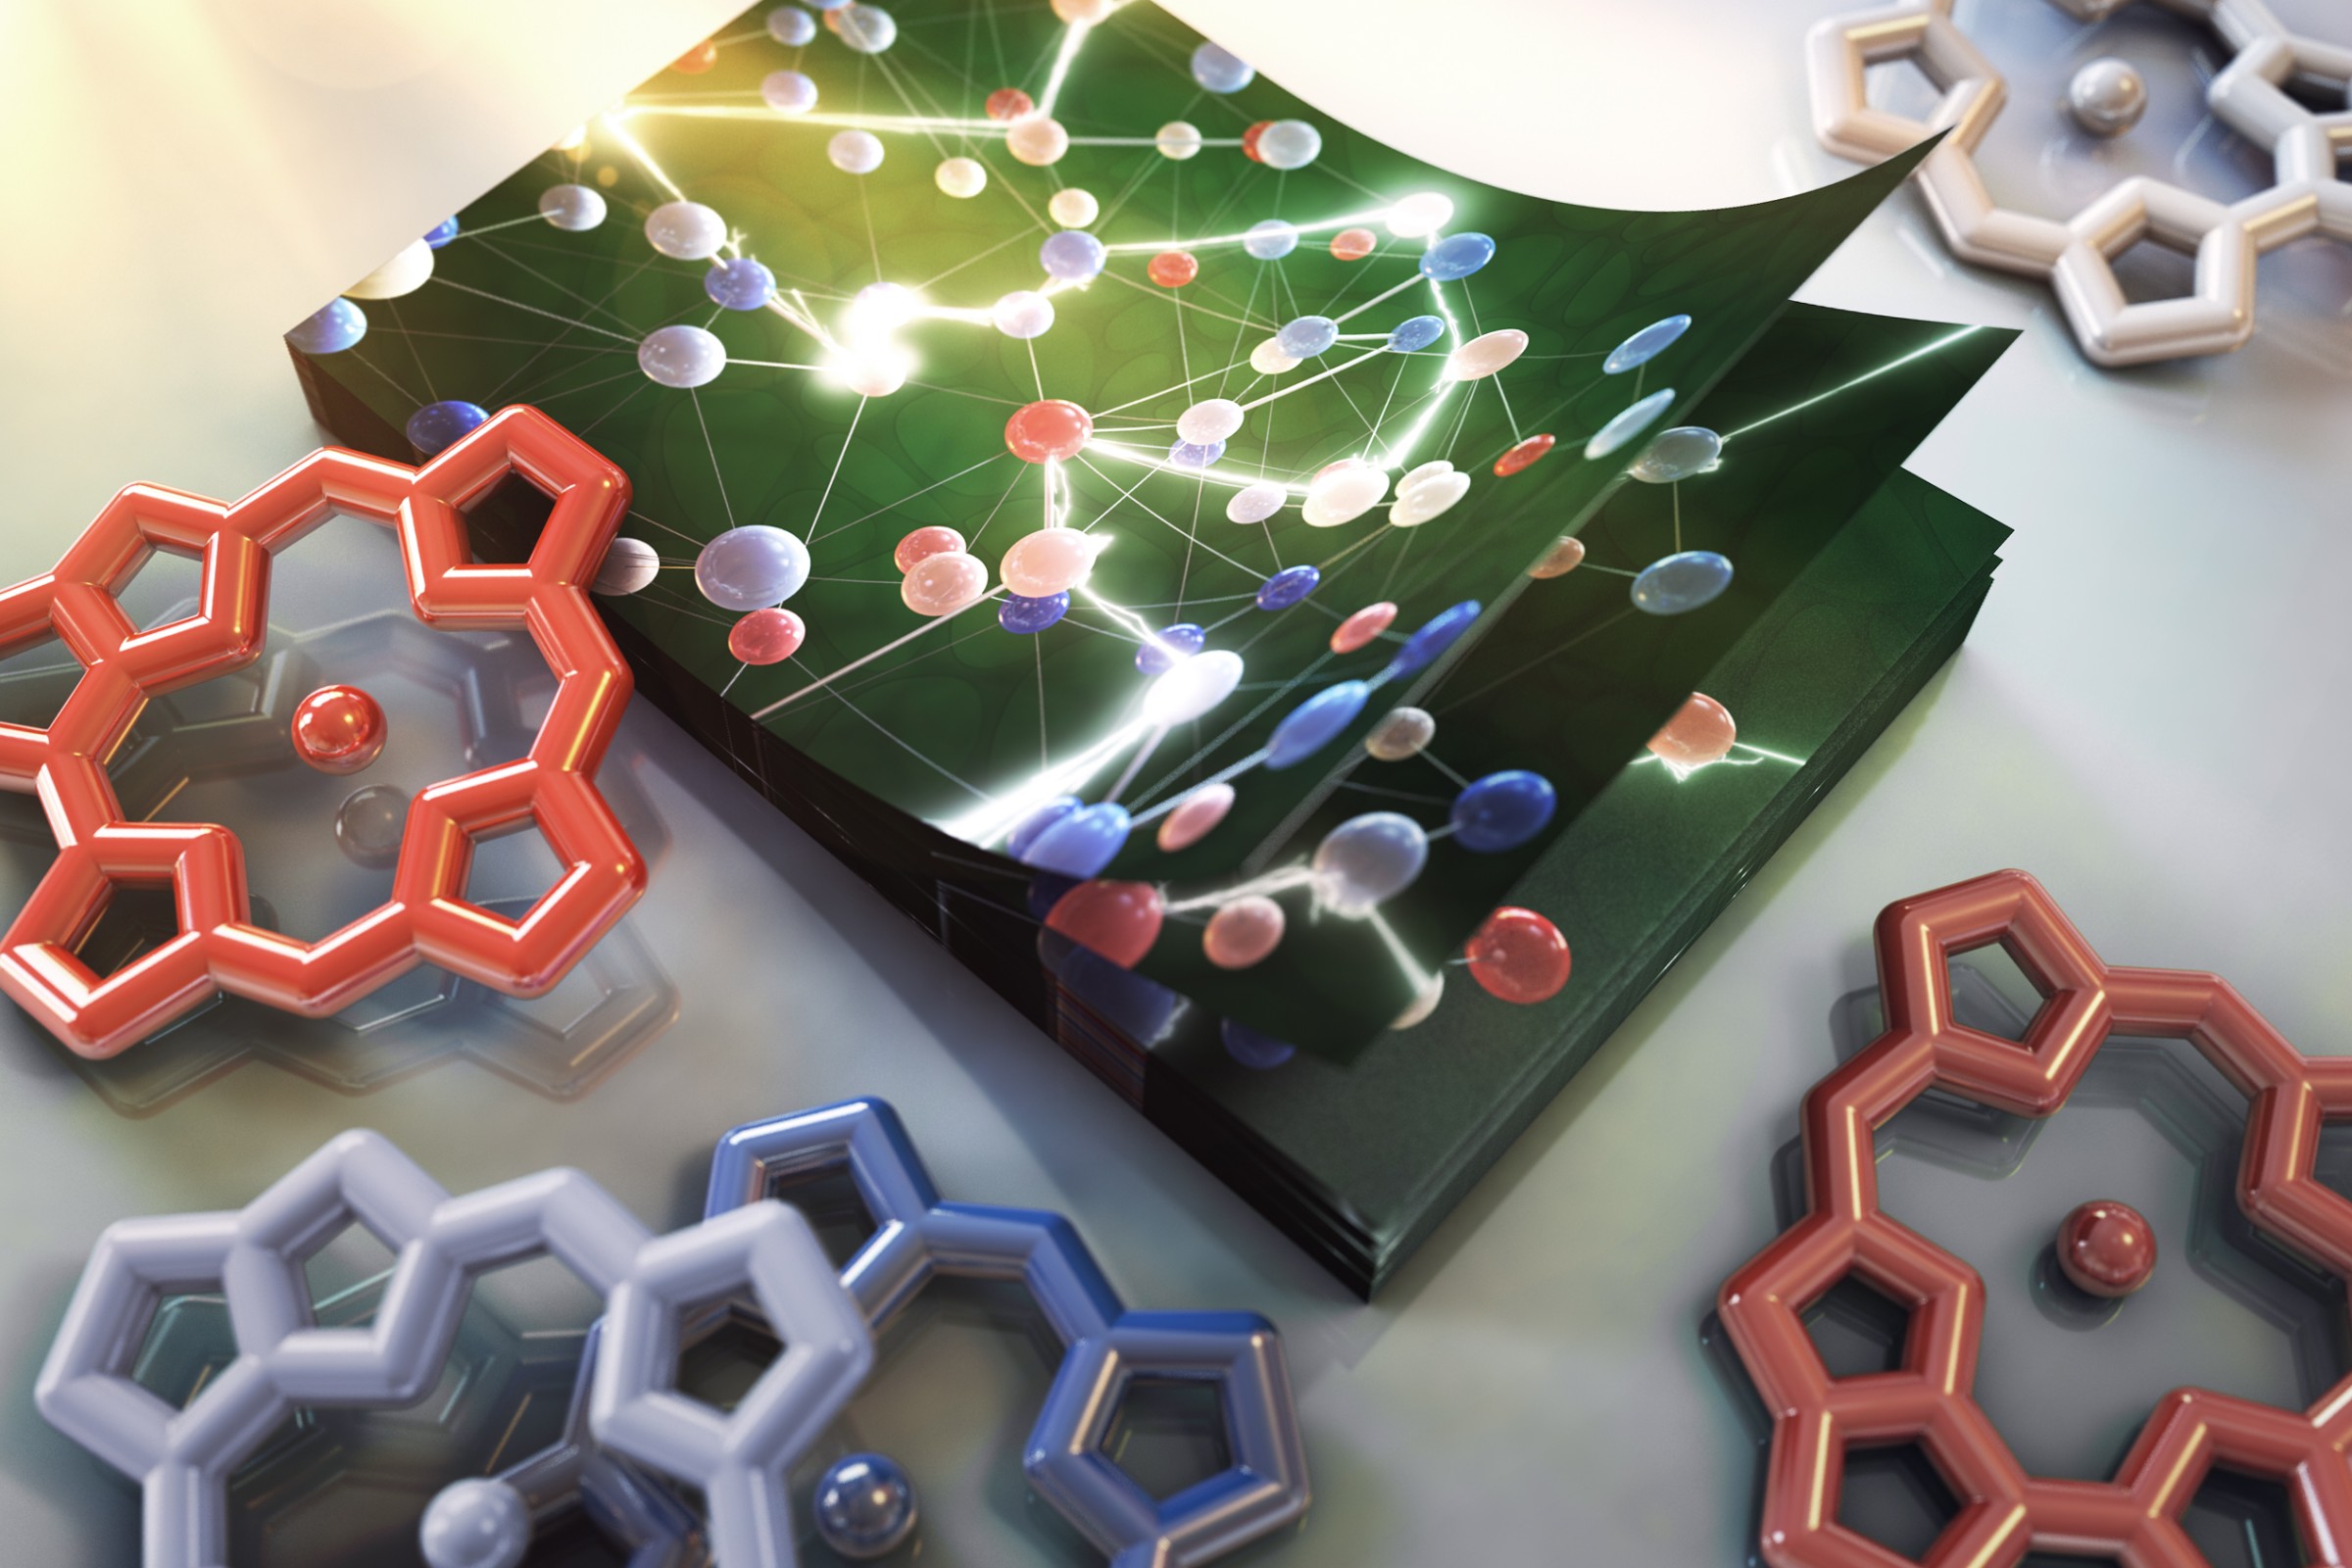 Like with a flip book, researchers can follow the dynamic absorption and energy transfer processes in photosystem I with the help of highly accurate quantum chemical calculations